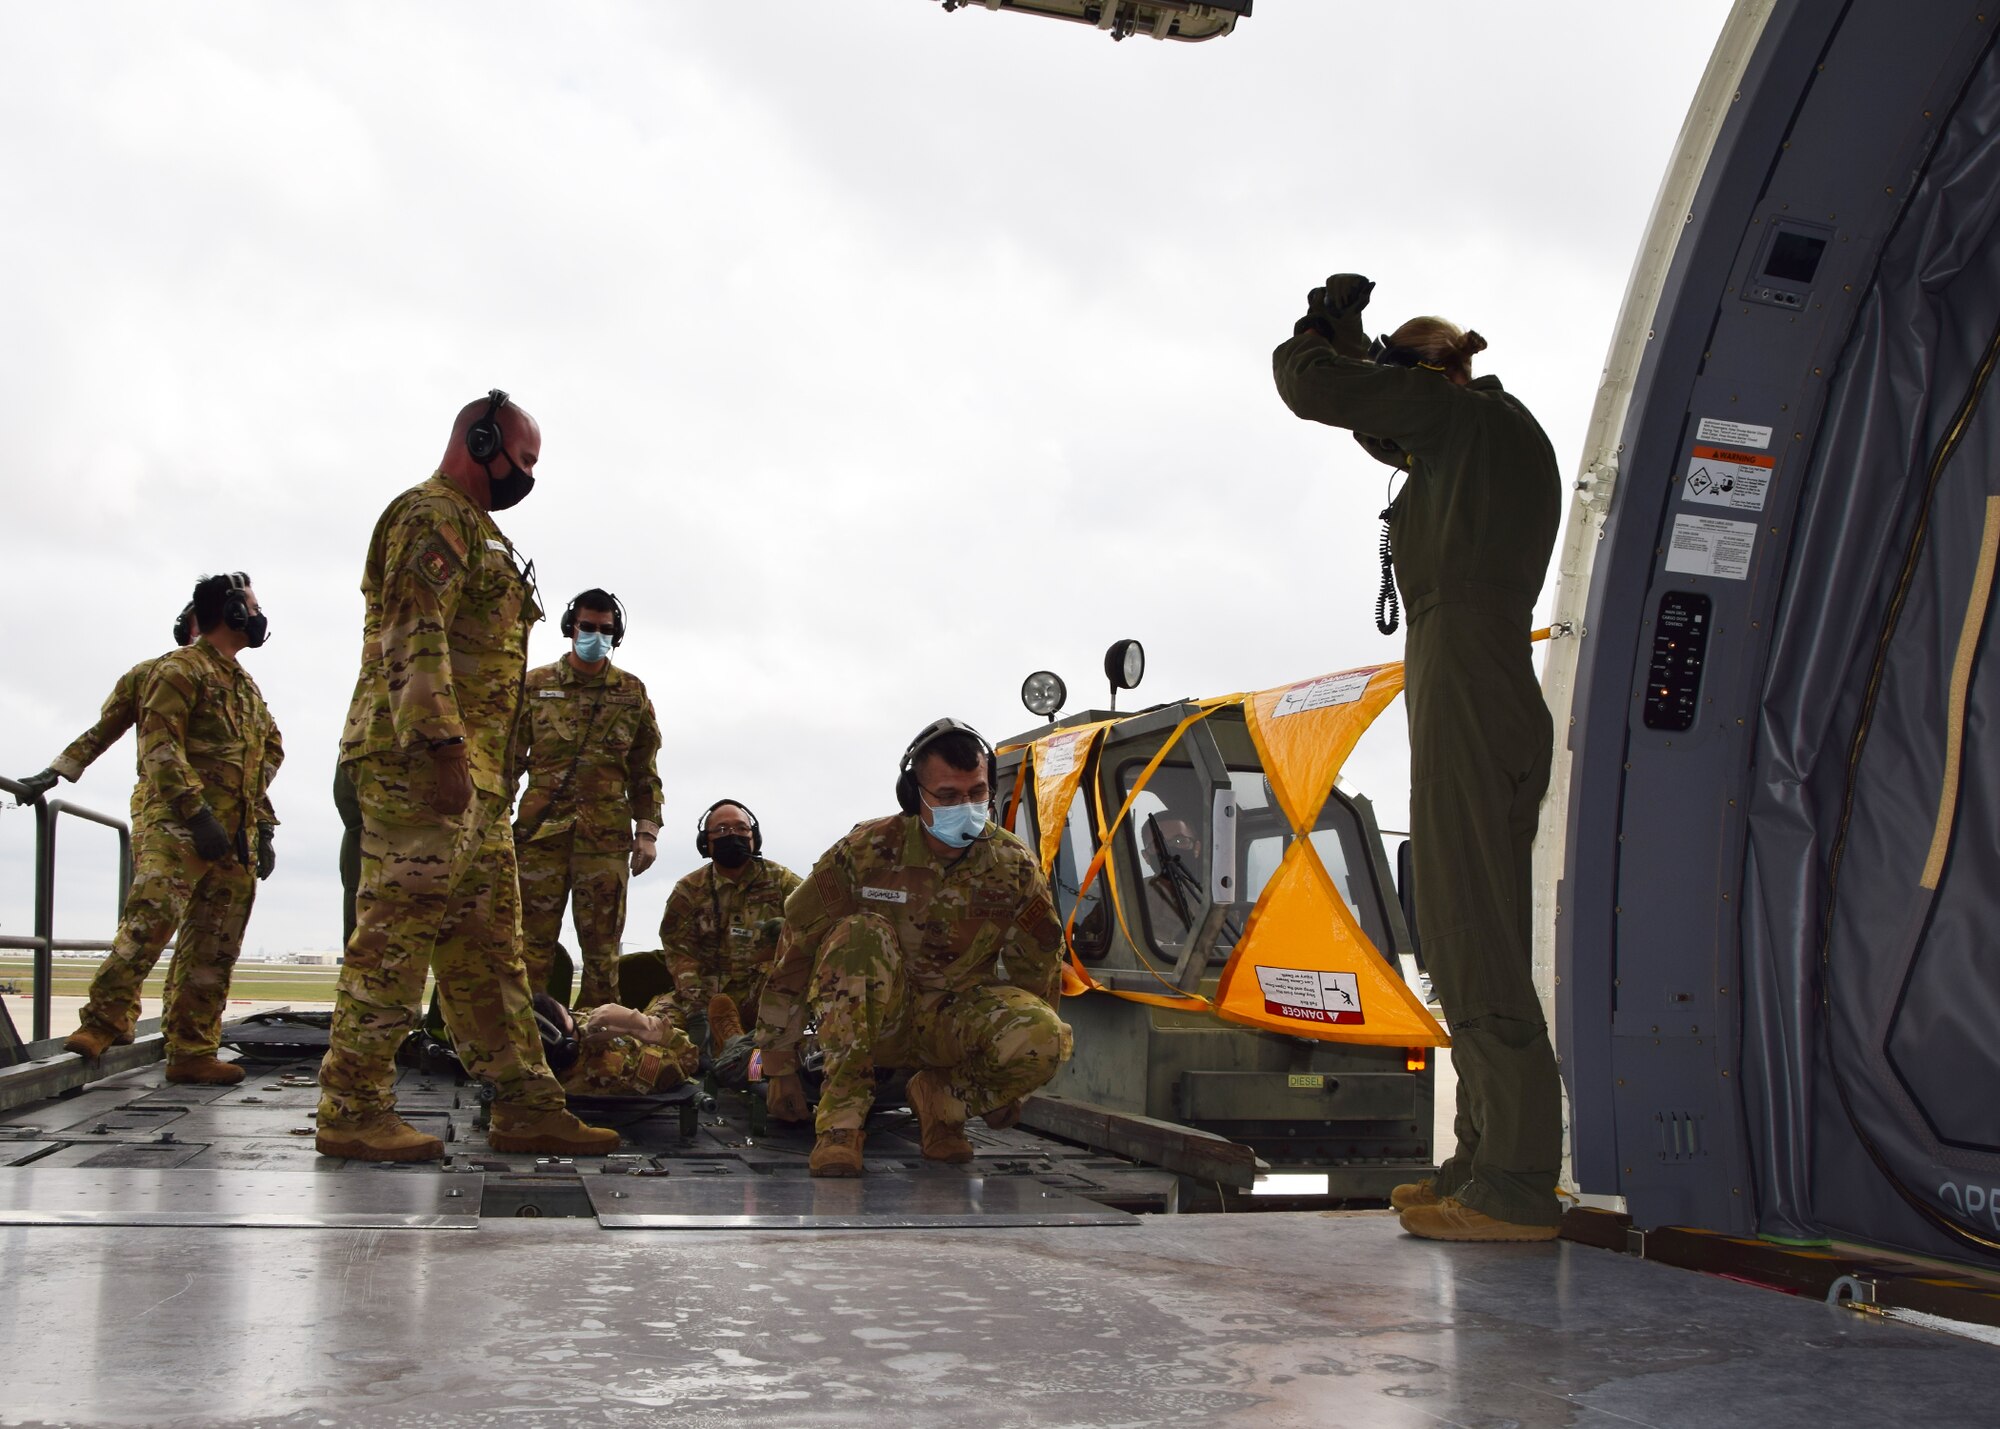 Reserve Citizen Airmen with the 433rd Aeromedical Evacuation Squadron prepare to carry a simulated patient on a litter into a KC-46A Pegasus during initial qualification training at Joint Base San Antonio-Lackland, Texas, March 9, 2021. When not serving in a military capacity, many of these personnel also work in the civilian healthcare industry. (U.S. Air Force photo by Tech. Sgt. Iram Carmona)